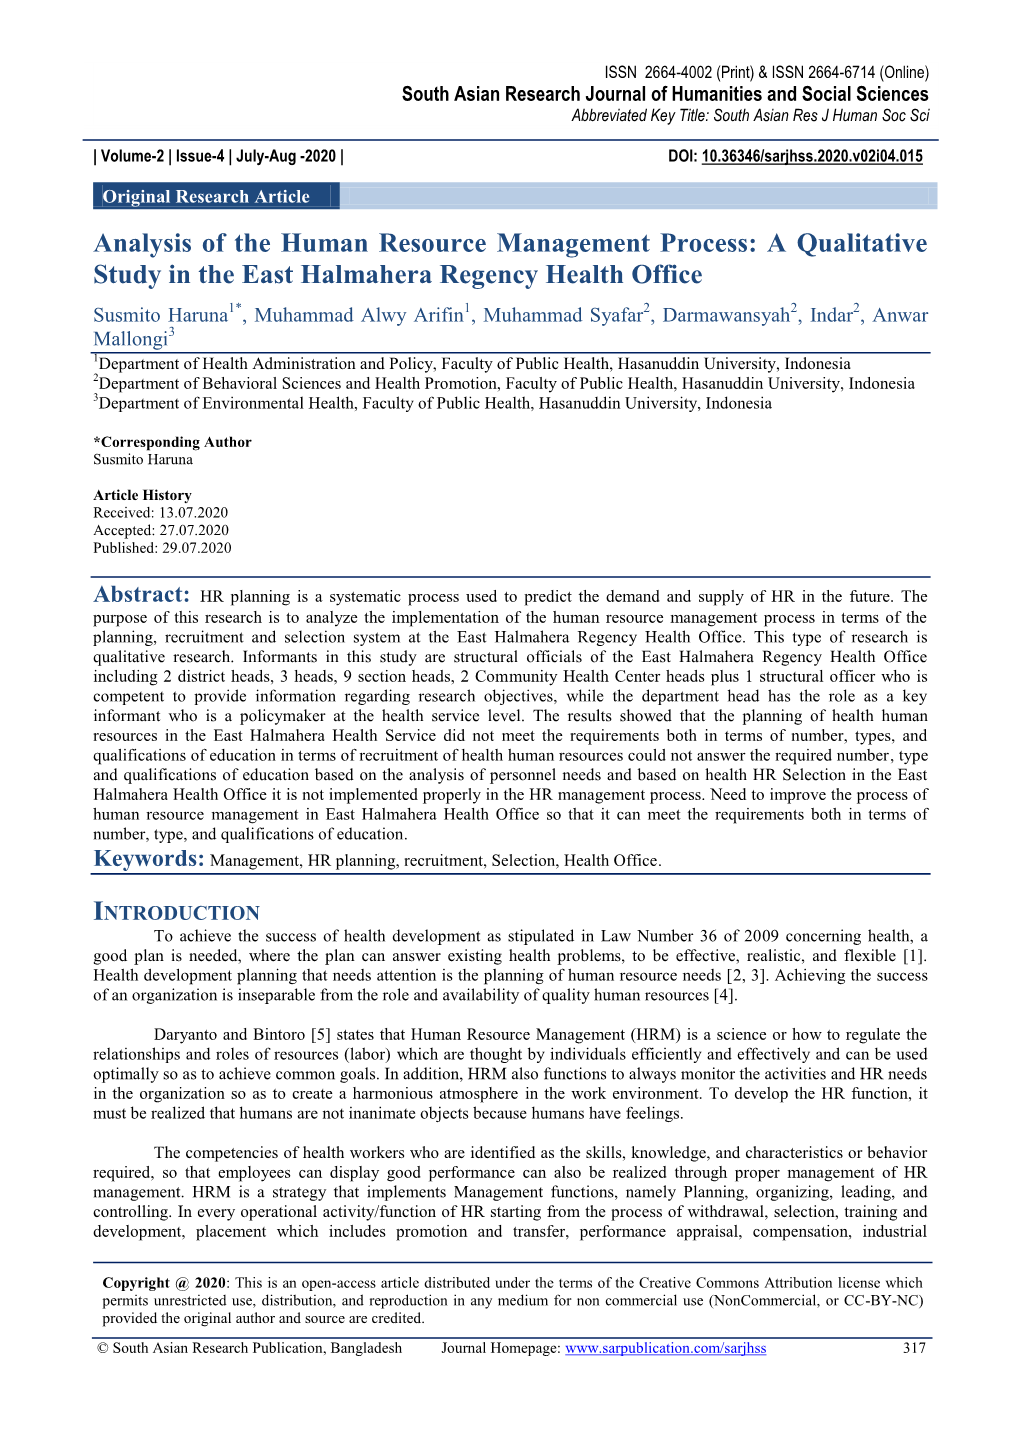 Analysis of the Human Resource Management Process: a Qualitative Study in the East Halmahera Regency Health Office